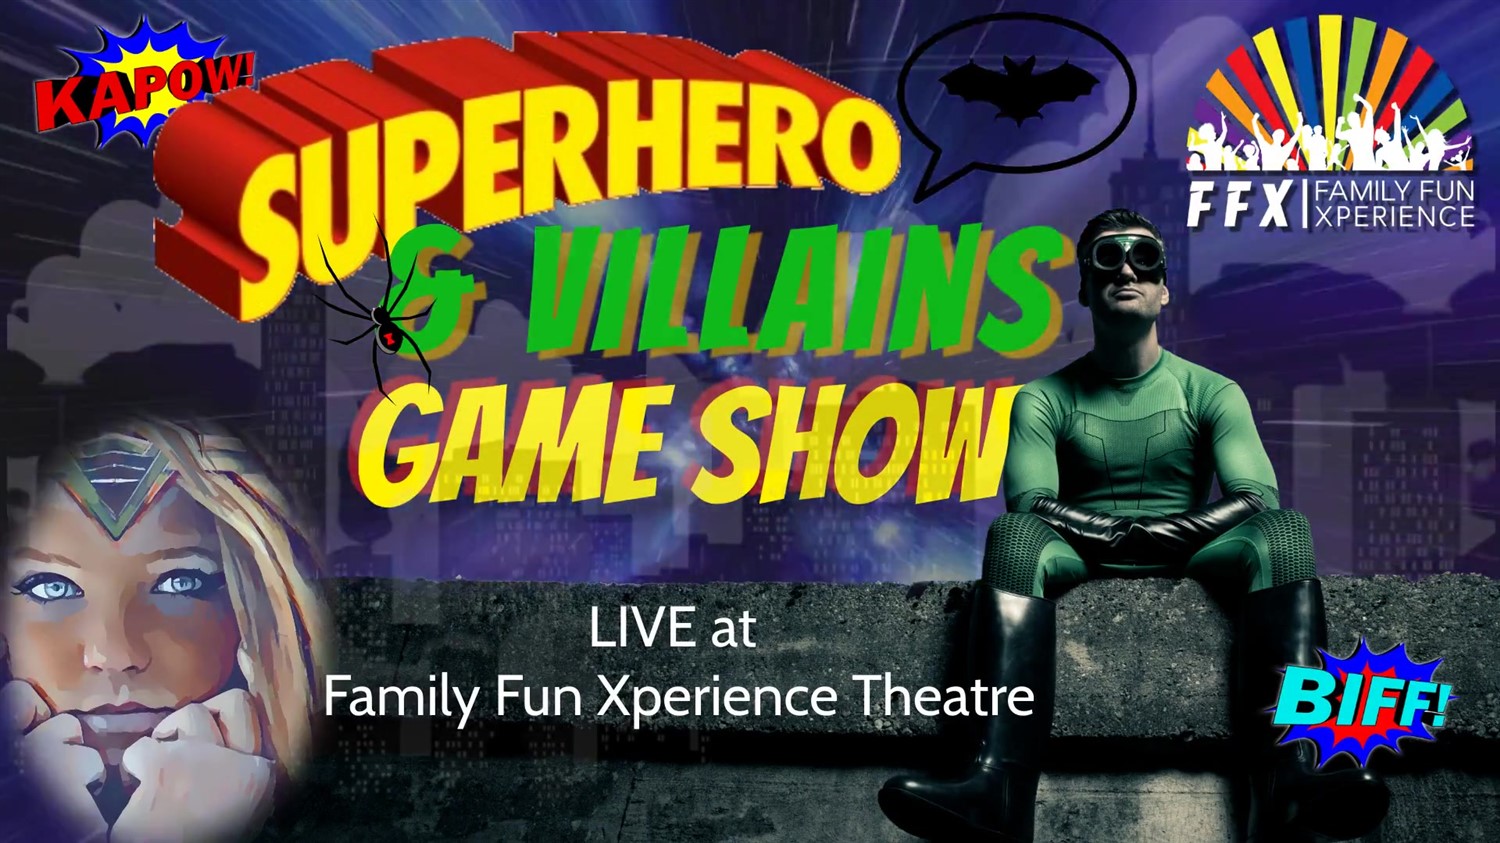 Superheroes & Villains Live Game Show Super fun for everyone! on Feb 19, 19:00@FFX Theatre - Buy tickets and Get information on Family Fun Xperience tickets.ffxshow.org